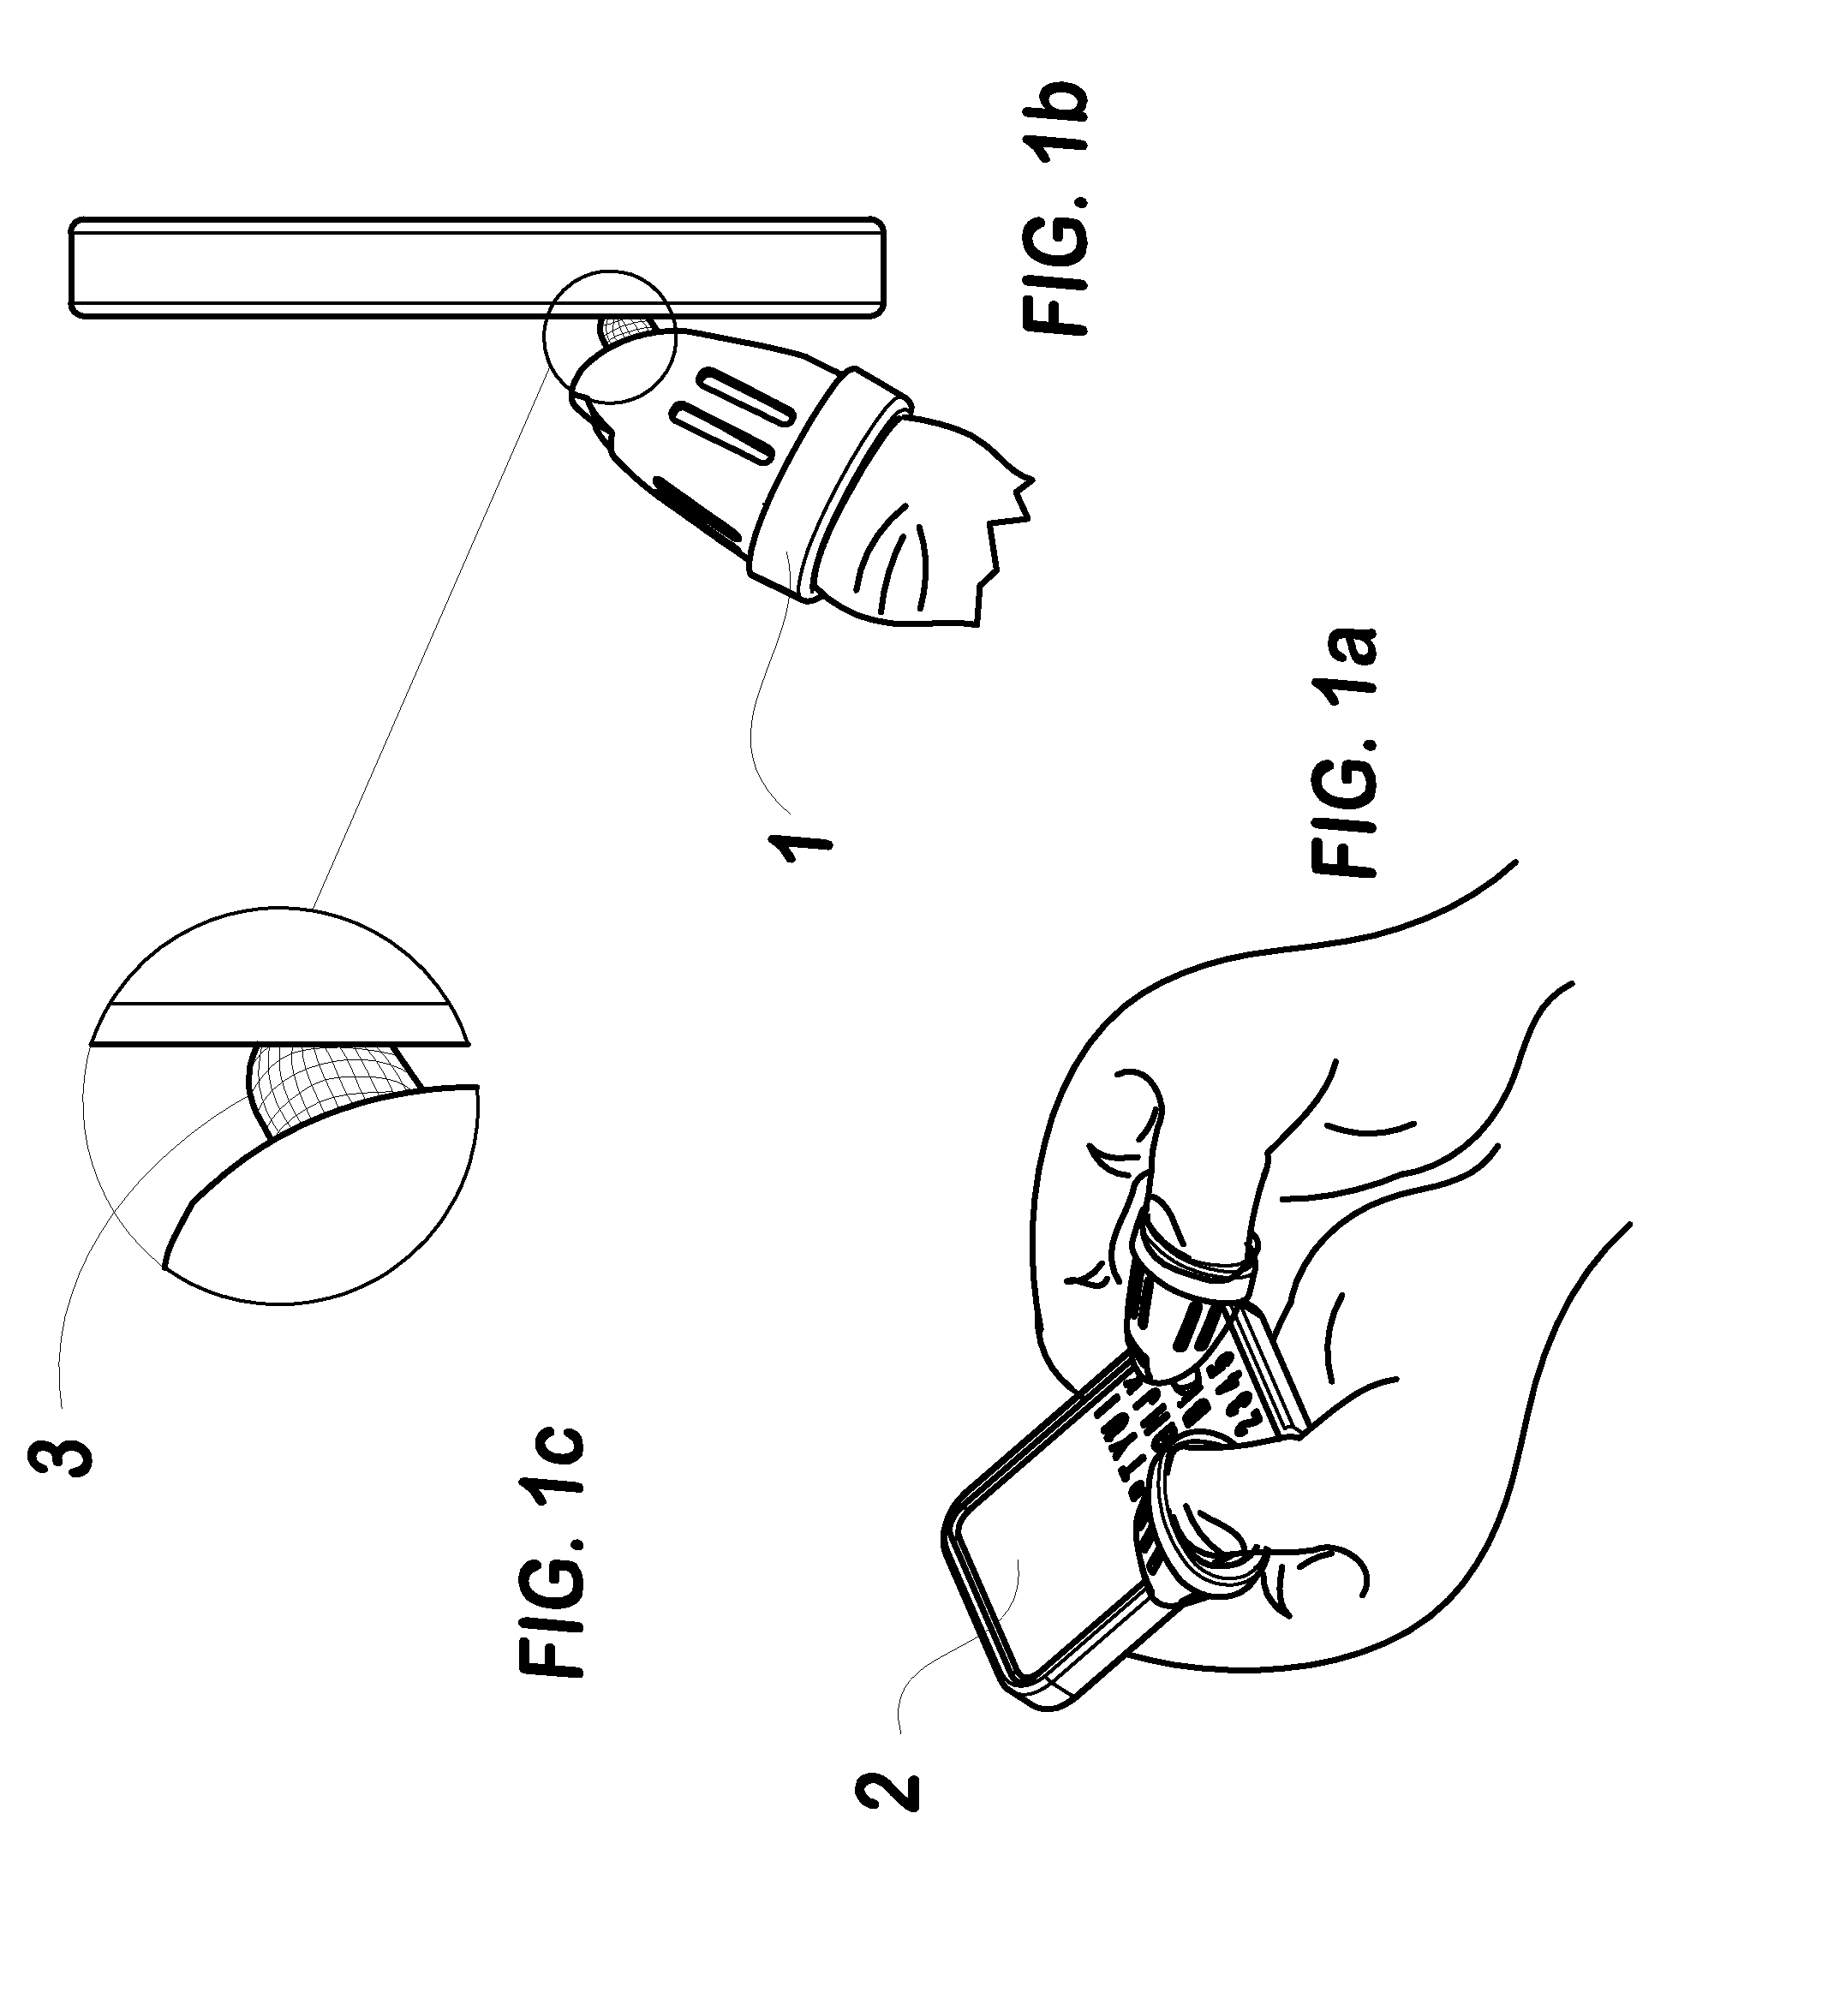 Thumb or Finger Devices with Electrically Conductive Tips & Other Features for Use with Capacitive Touch Screens and/or Mechanical Keyboards Employed in Smartphones & Other Small Mobile Devices